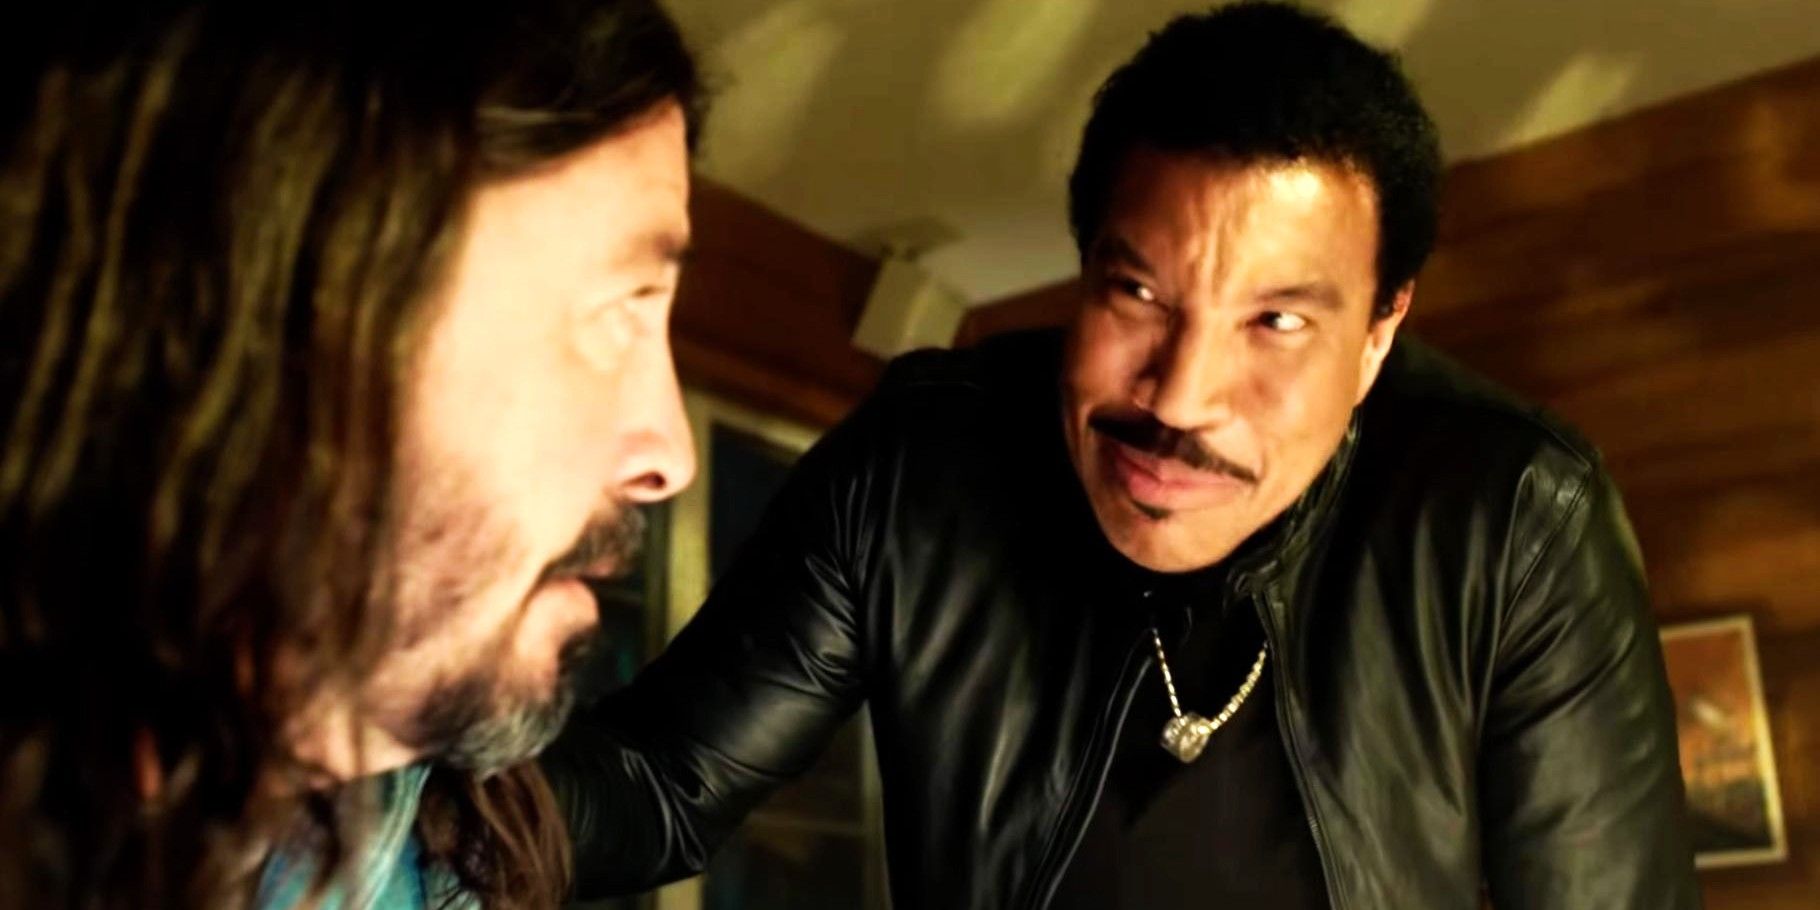 Dave Grohl and Lionel Ritchie in Foo Fighters movie Studio 666